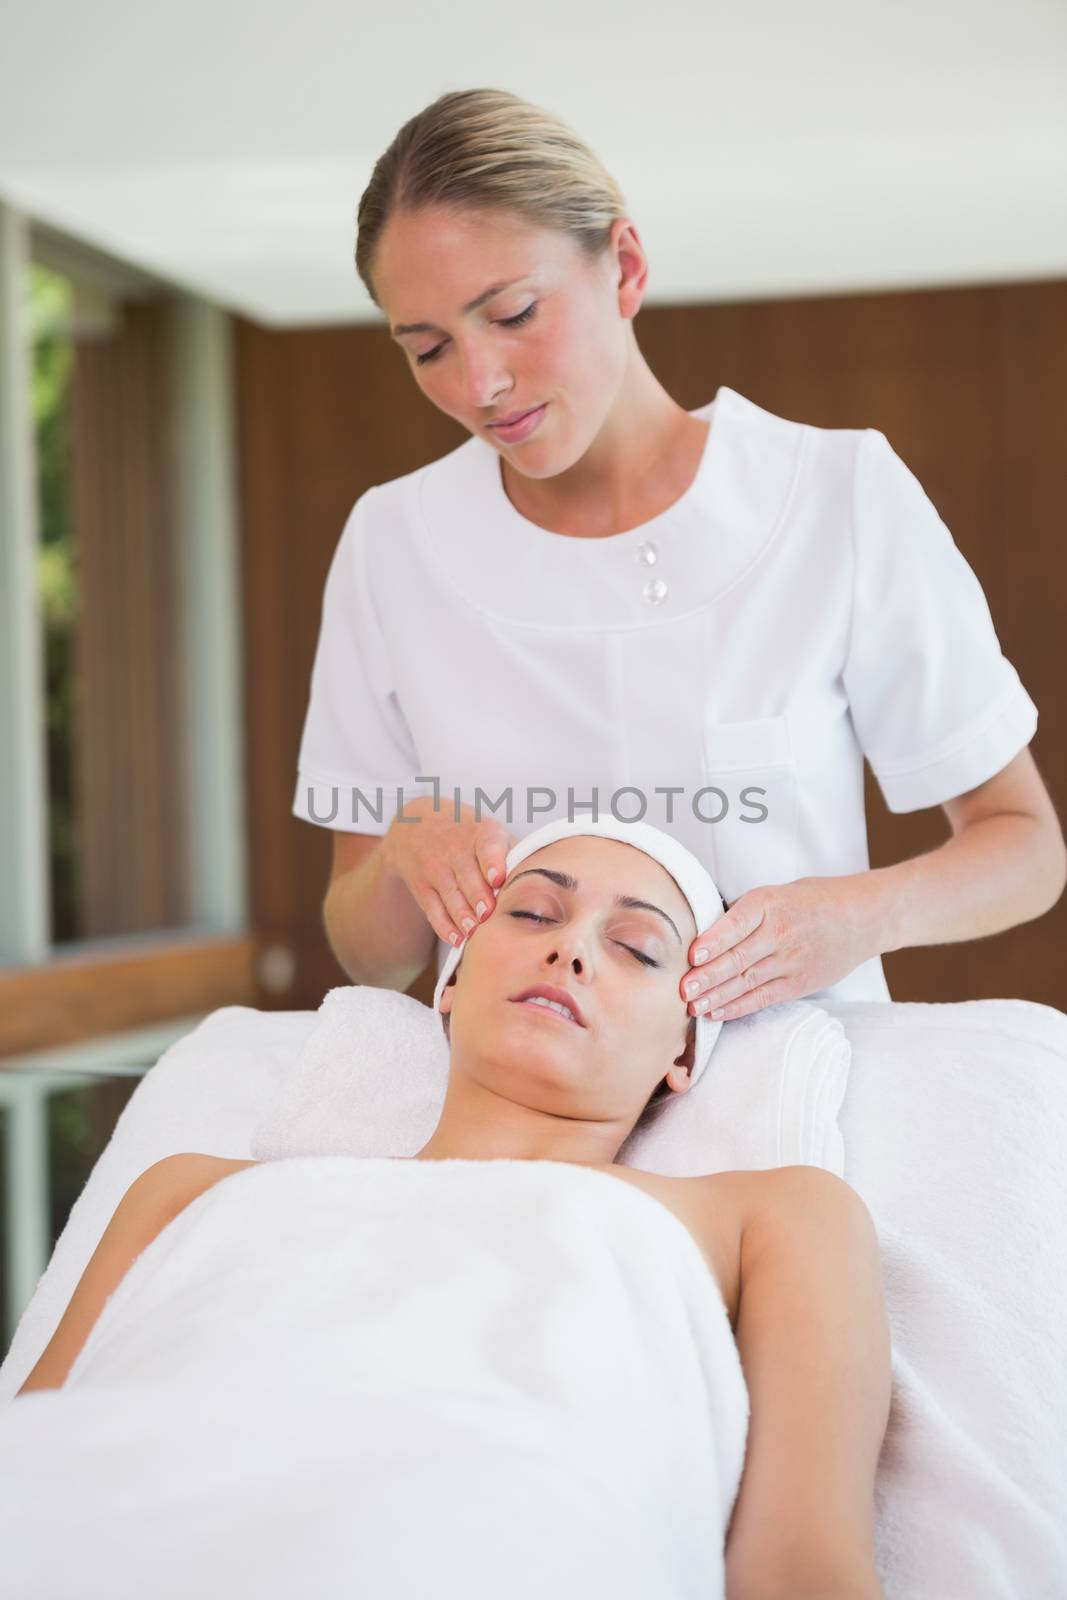 Peaceful brunette getting facial massage from beauty therapist in the health spa